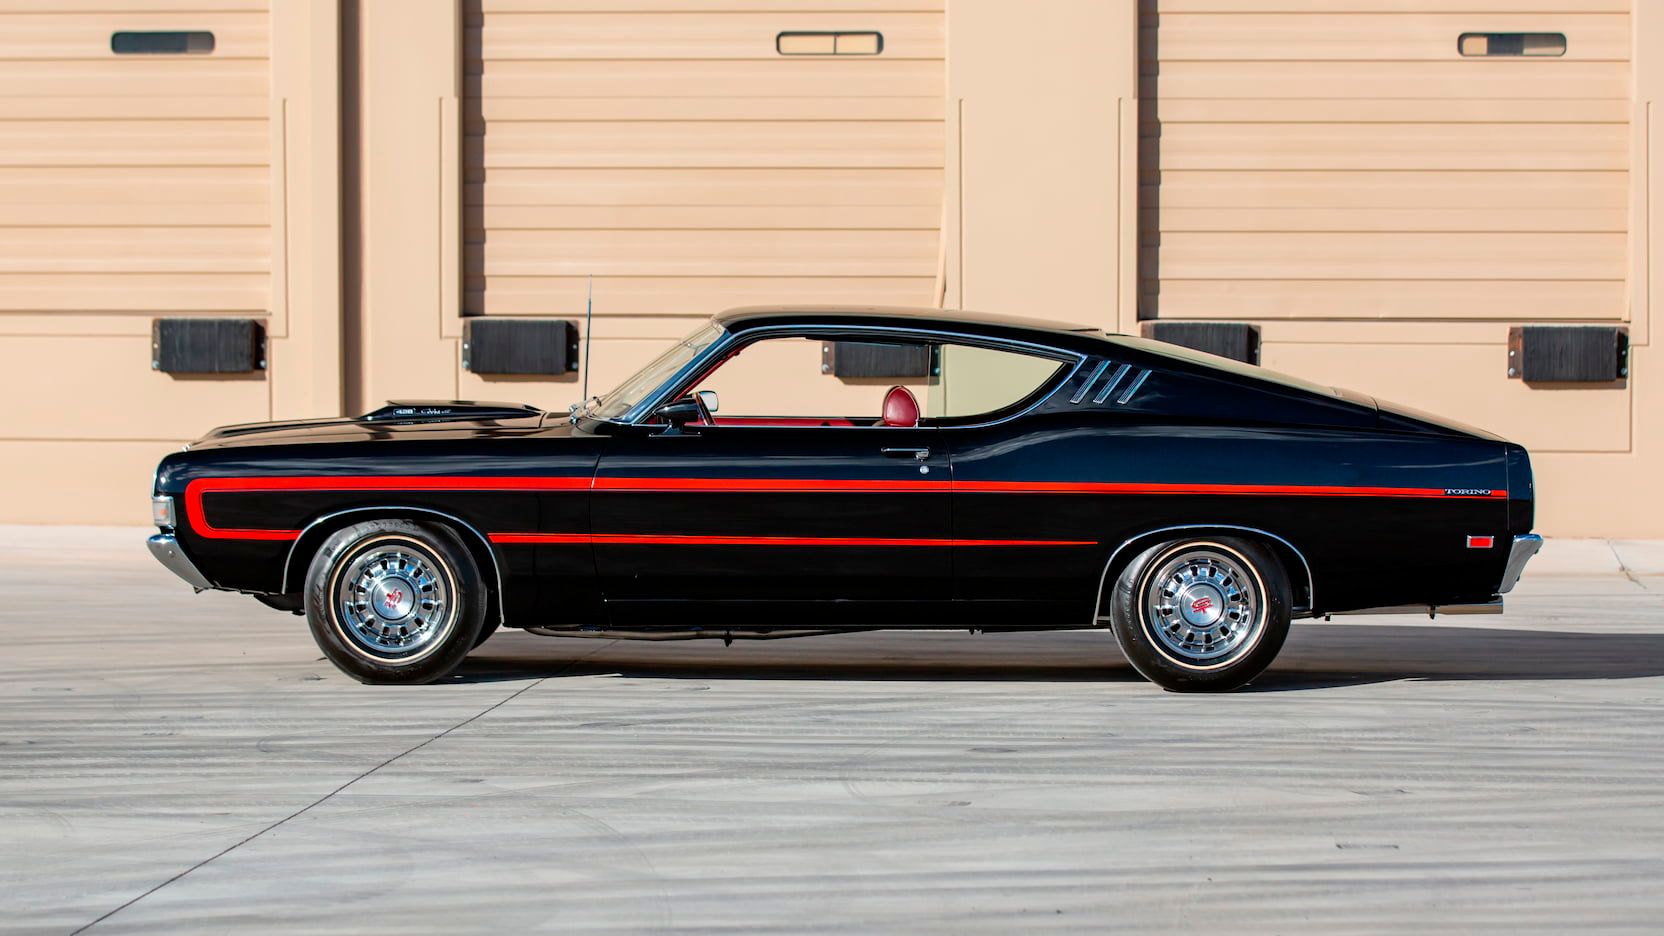 A parked black and red 1969 Ford Torino GT